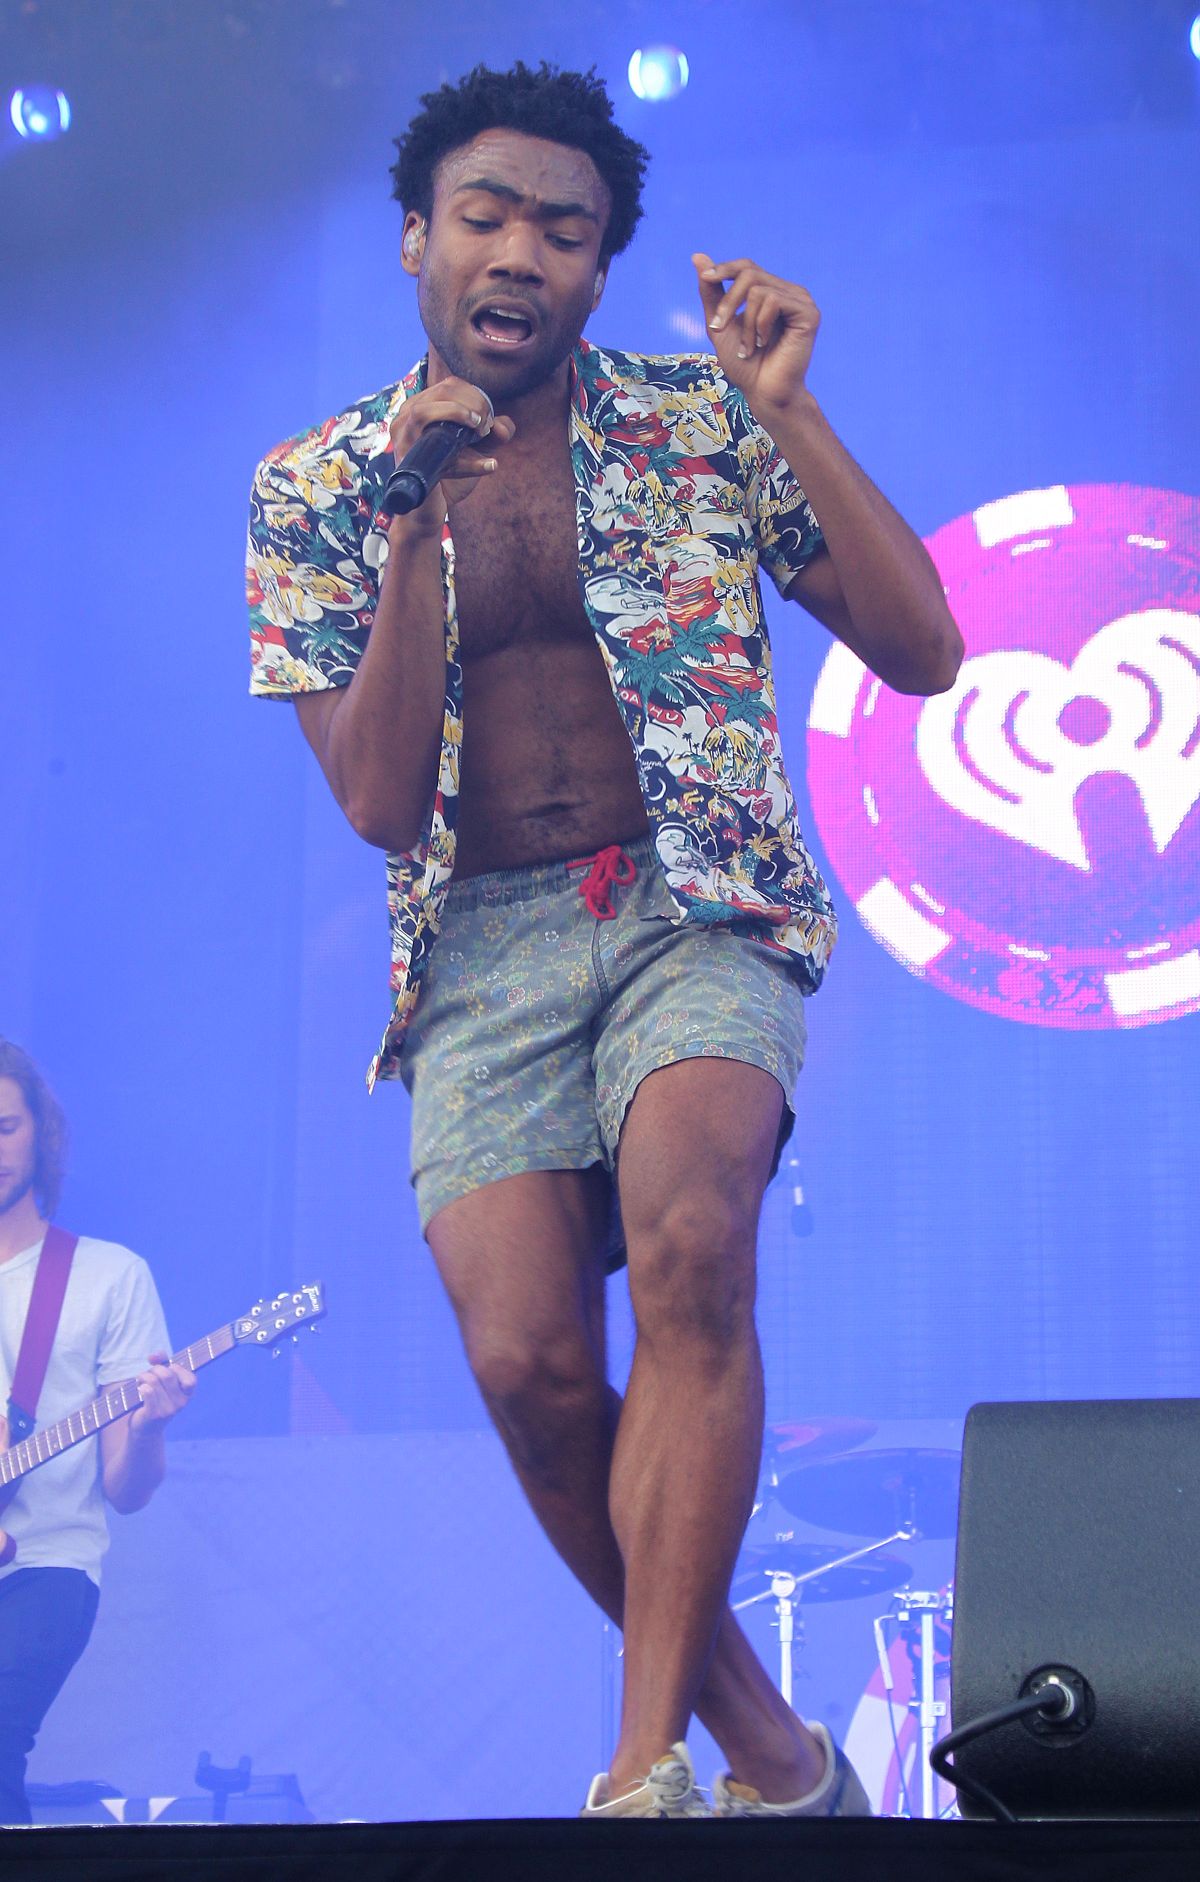 17 Pictures Of Childish Gambino’s Chest (PHOTOS) - 93.9 WKYS